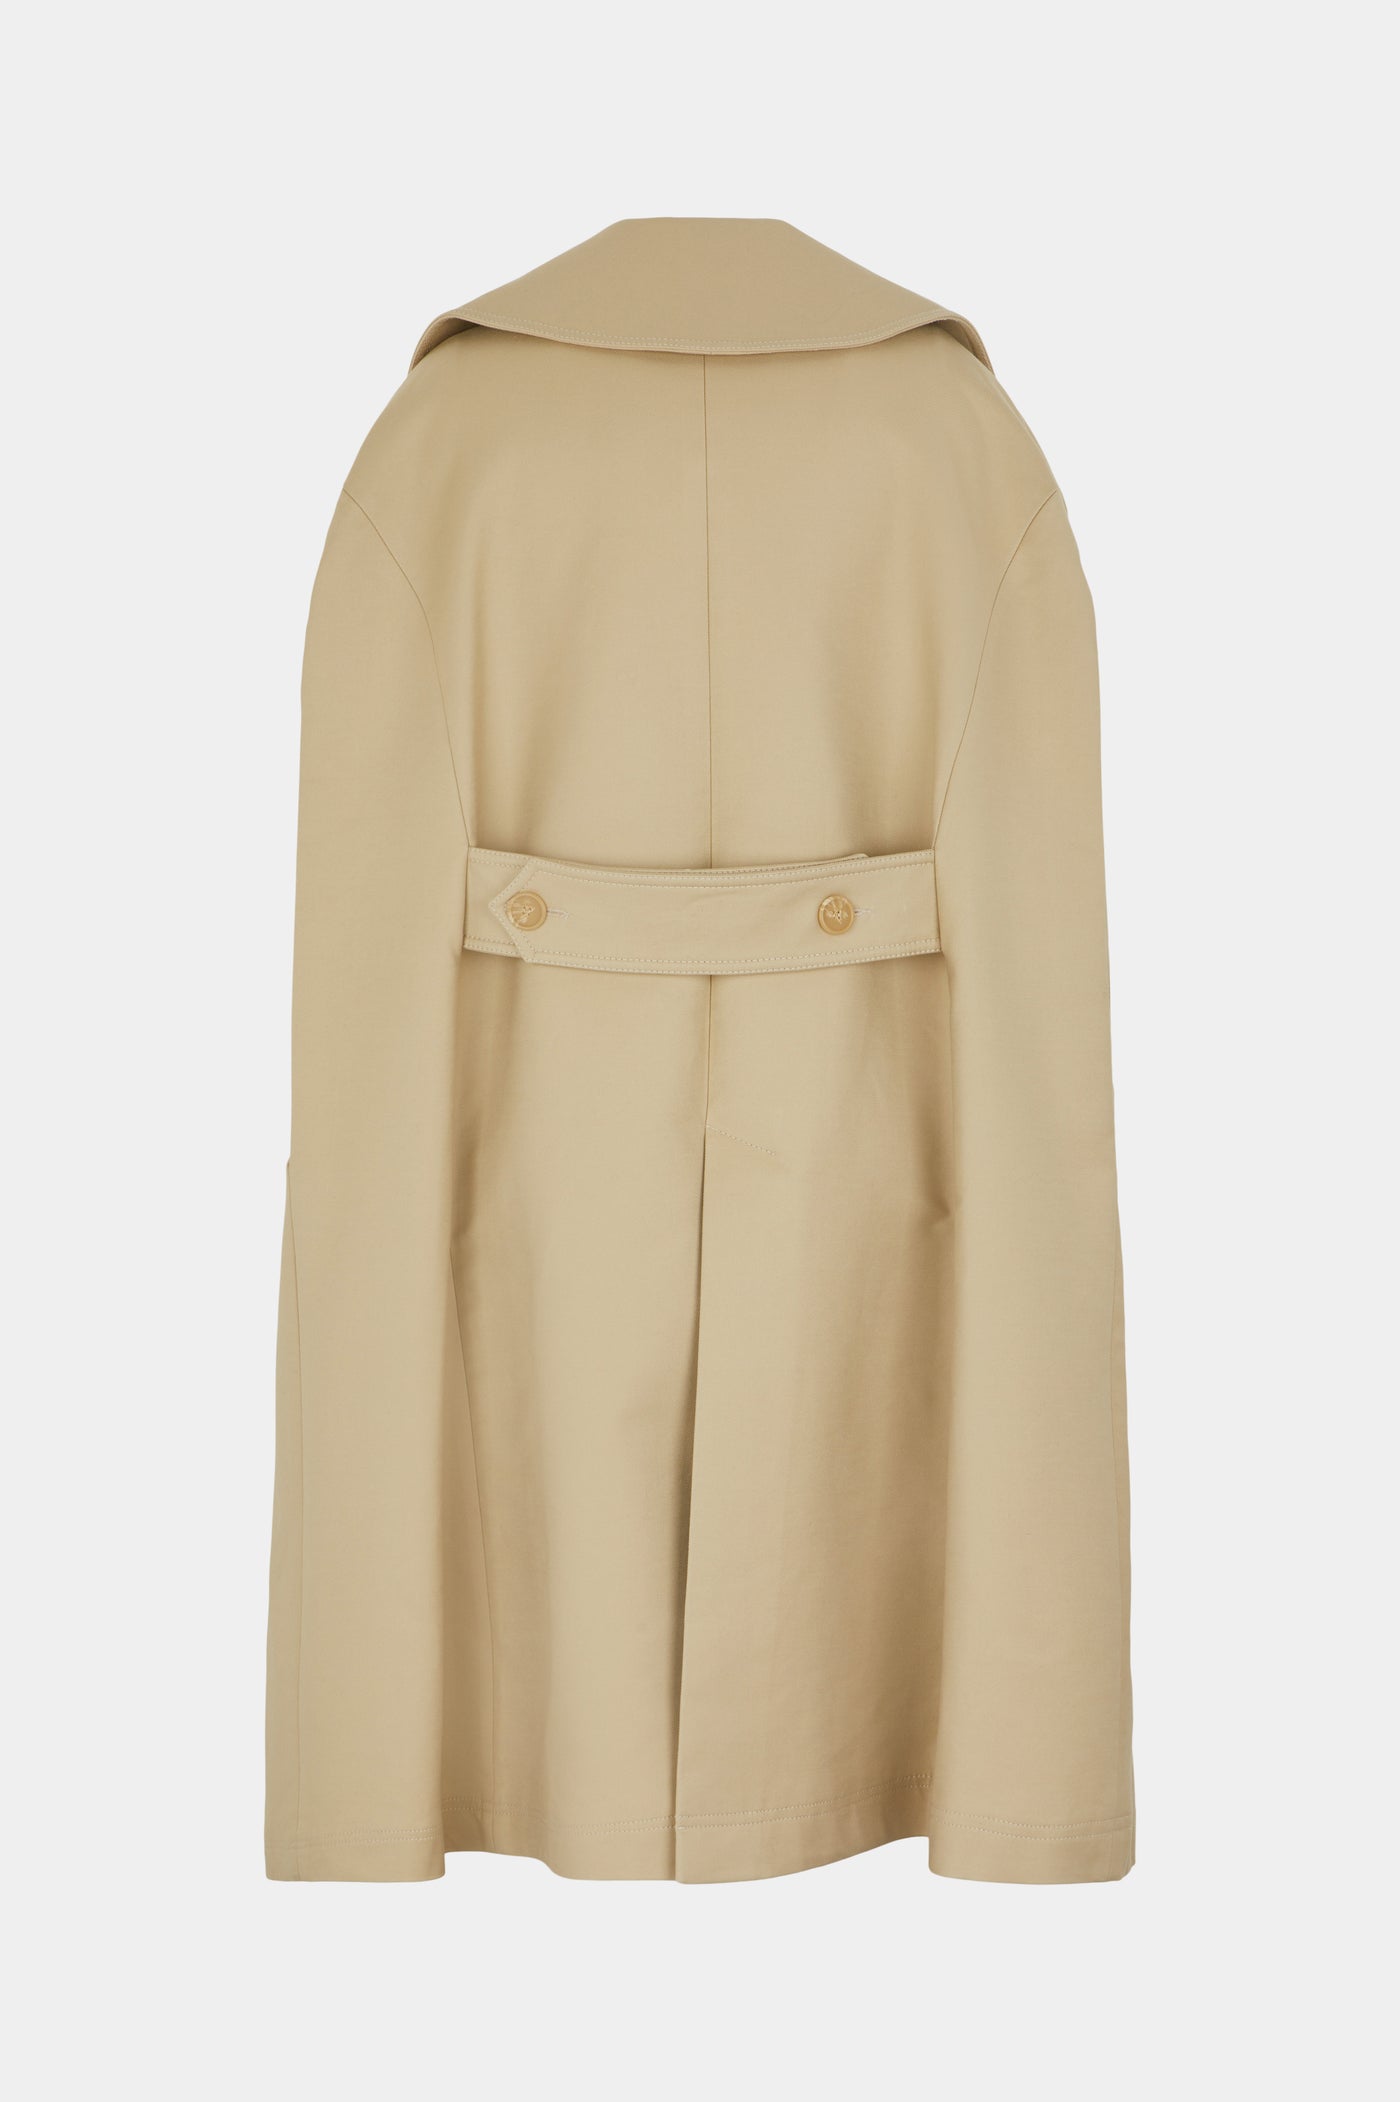 The Trench cape